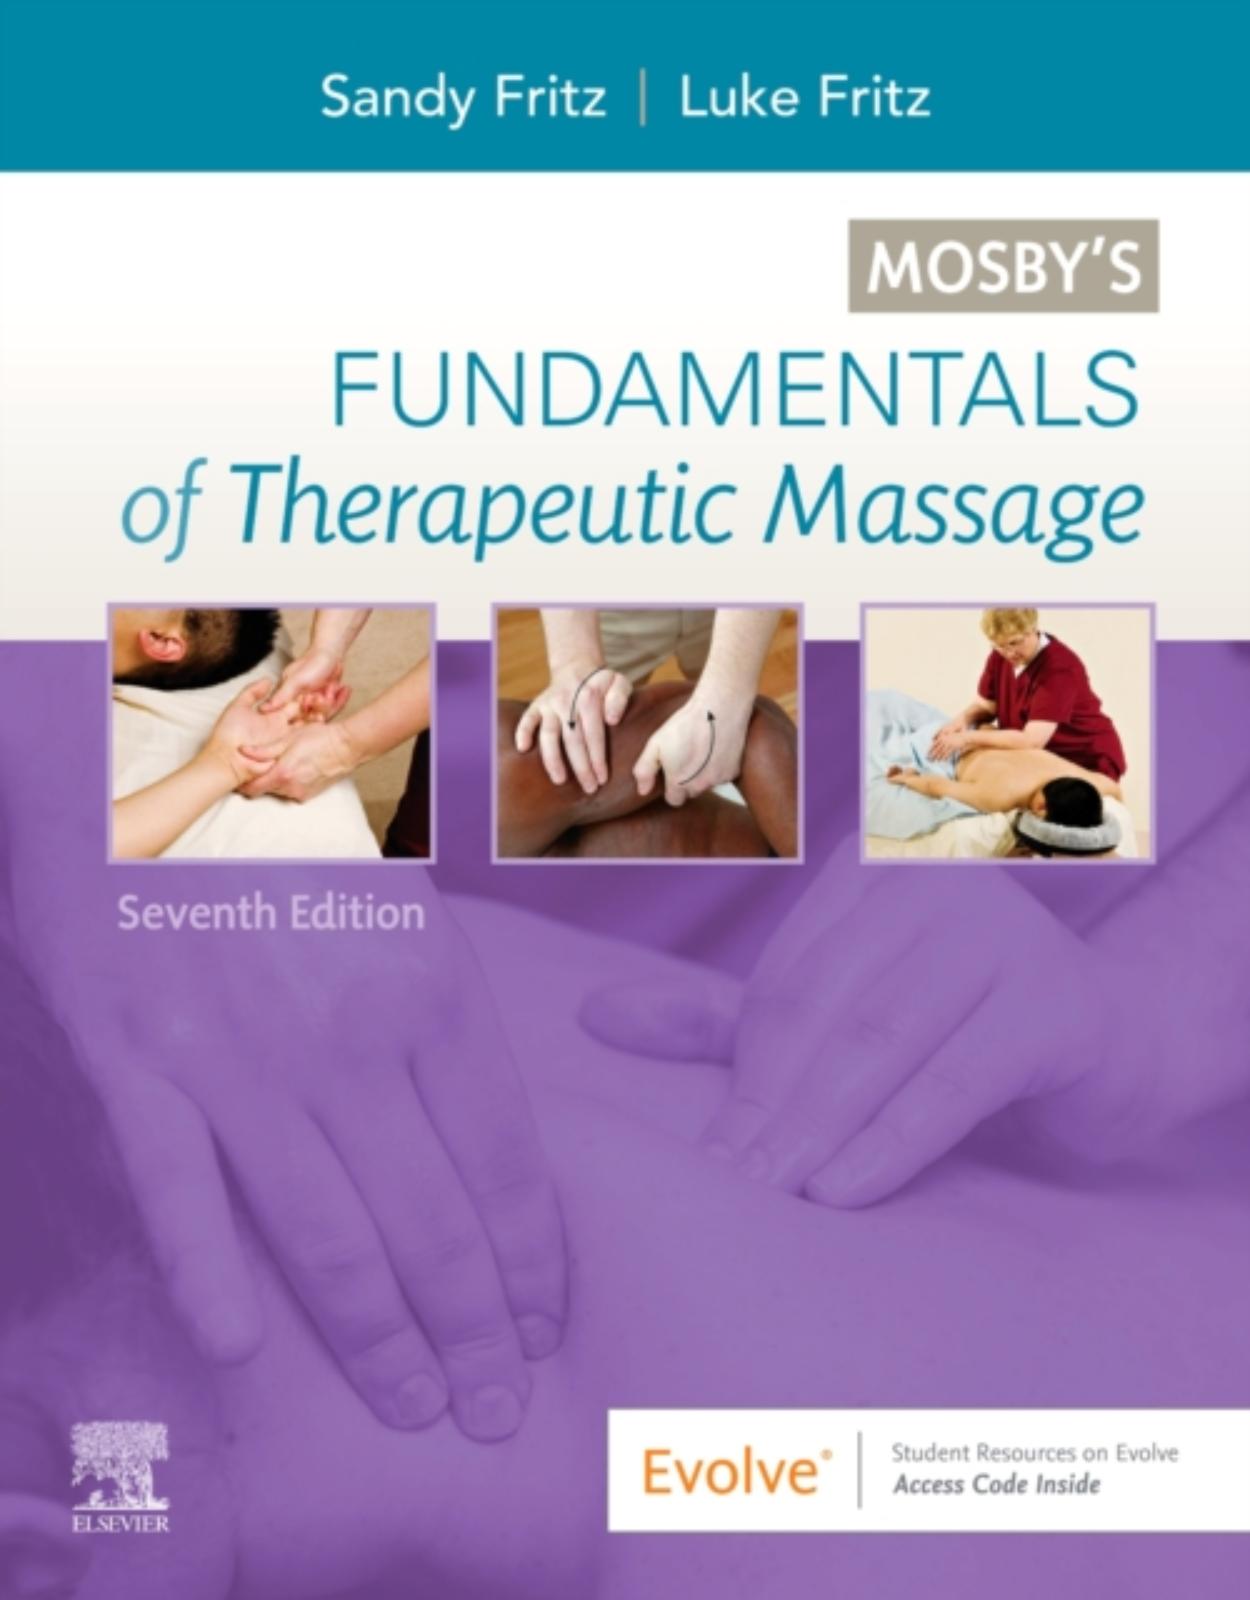 Mosby’s Fundamentals of Therapeutic Massage